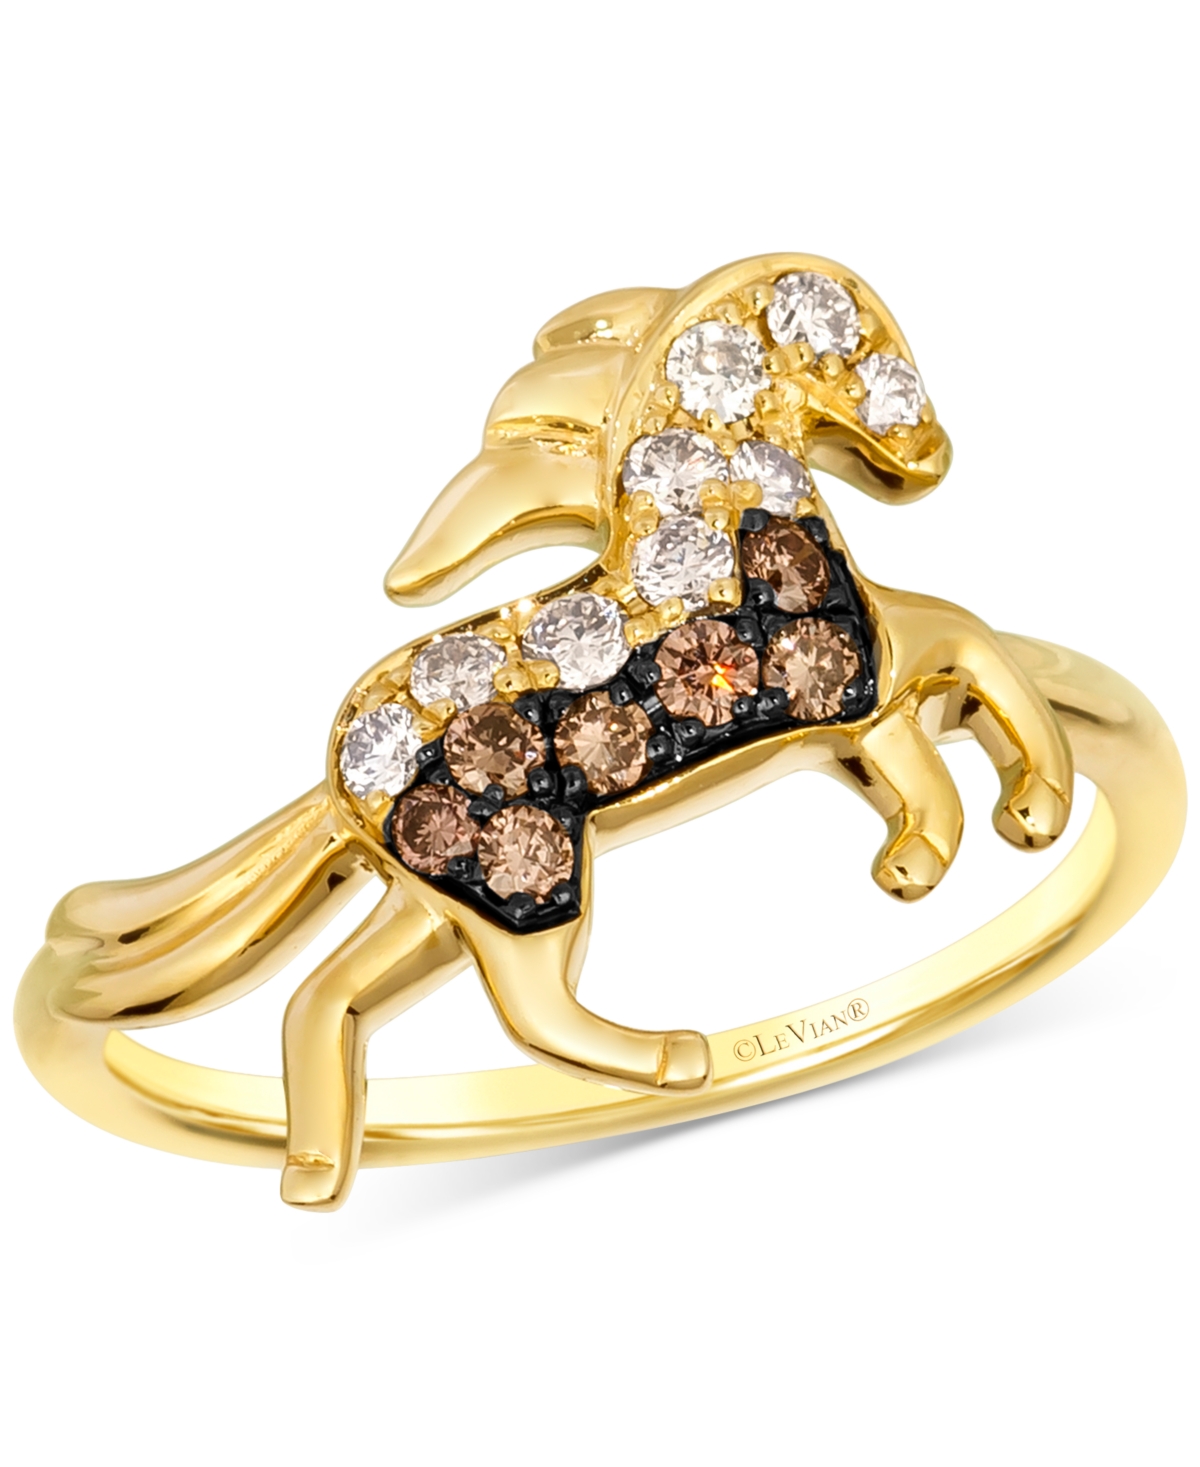 Le Vian Chocolate Diamond & Nude Diamond Horse Ring (1/3 Ct. T.w.) In 14k Gold In K Honey Gold Ring